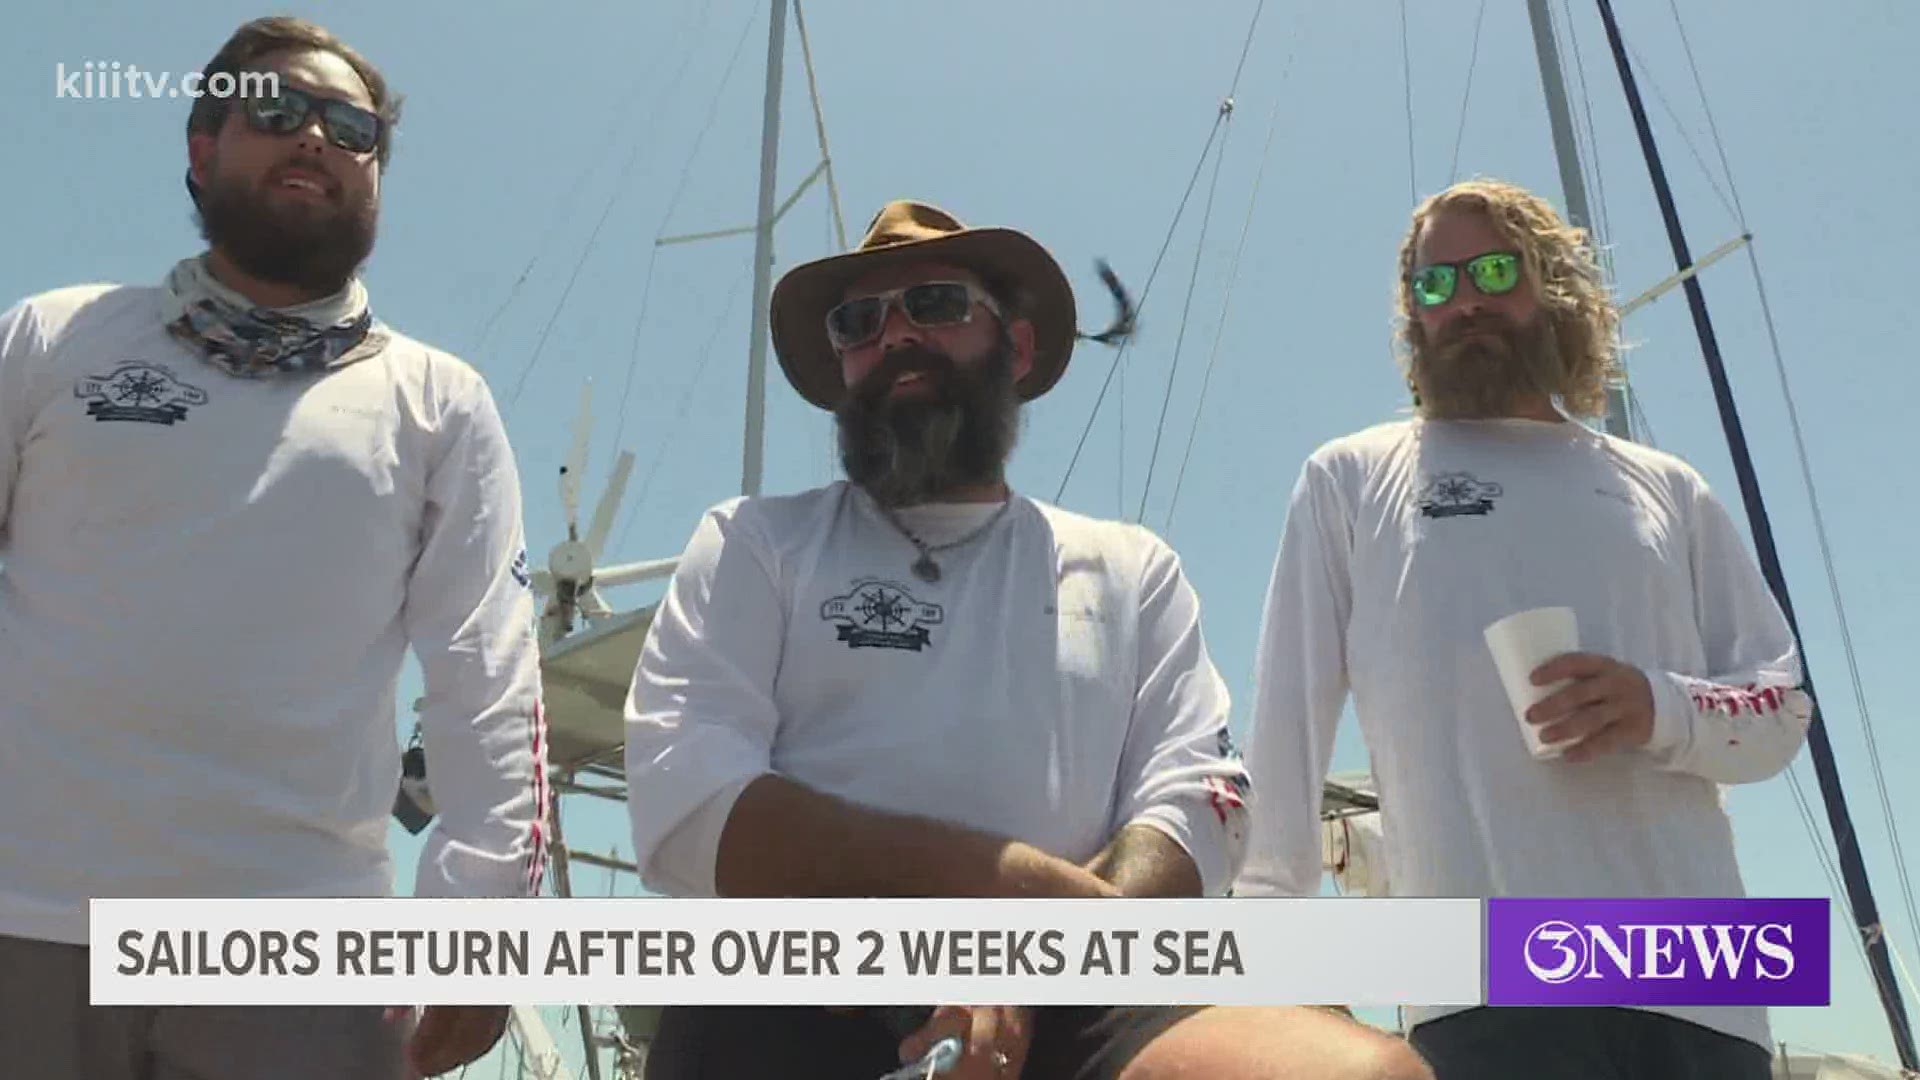 Their journey began when they traveled to Sint Maarten to pick up a sailboat and bring it back to the Coastal Bend.